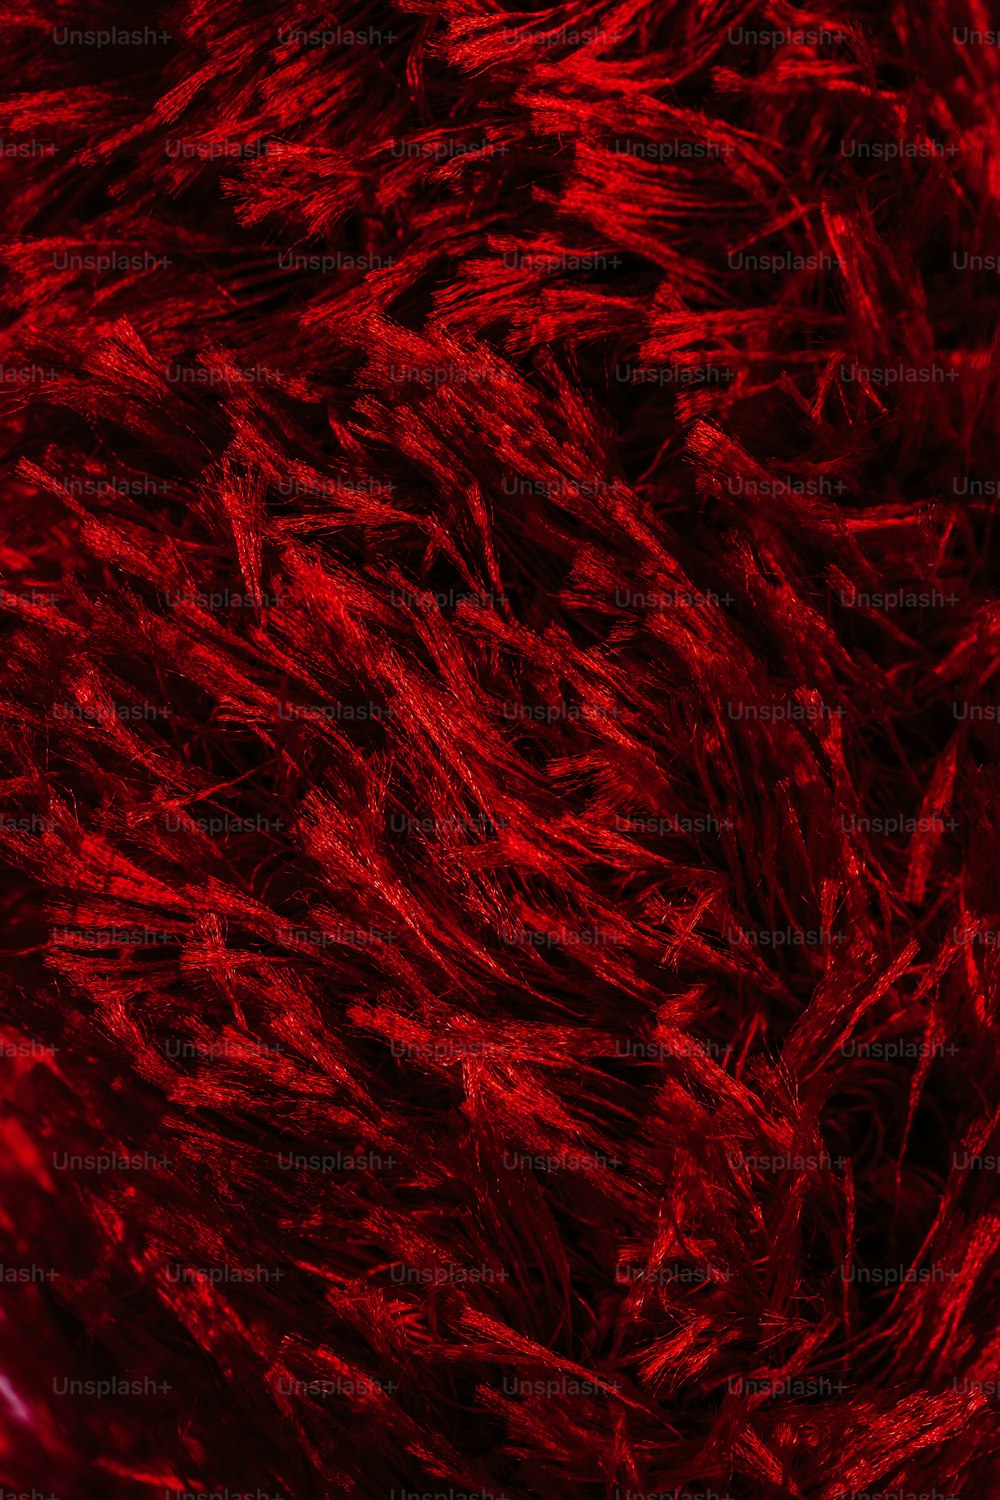 a close up of a red fur texture